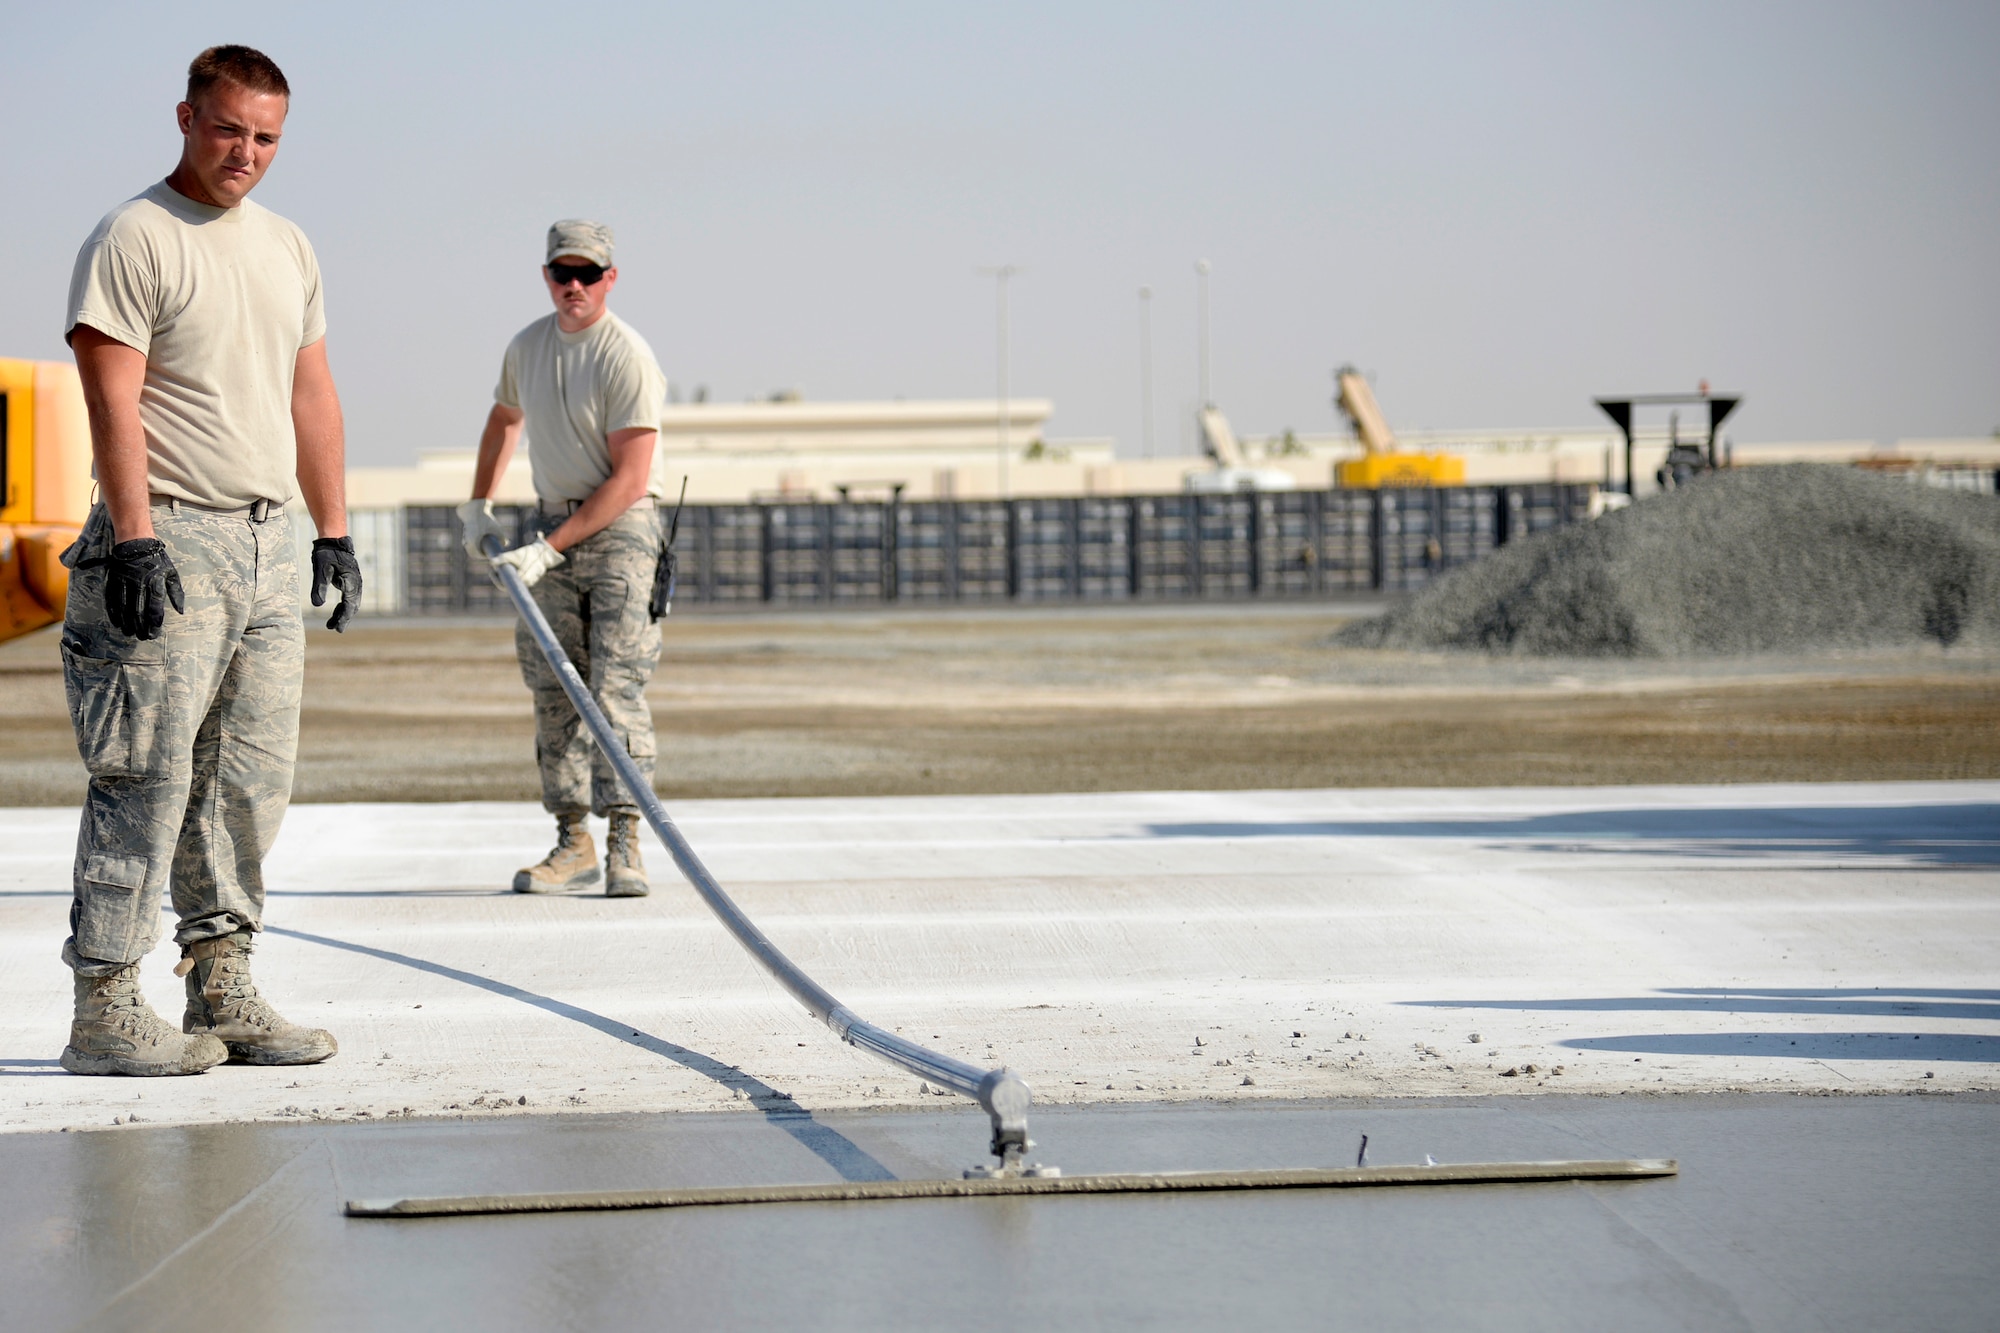 Senior Airman Dillon, Expeditionary Civil Engineer Squadron watches as Tech. Sgt. Ronald, ECES, works on a new concrete pad at the Australian beddown site on an undisclosed location in Southwest Asia Oct. 30, 2014. Airmen with the ECES worked side-by-side with their Australian counterparts as they collectively constructed a beddown site from the ground up. (U.S. Air Force photo/Tech. Sgt. Marie Brown)